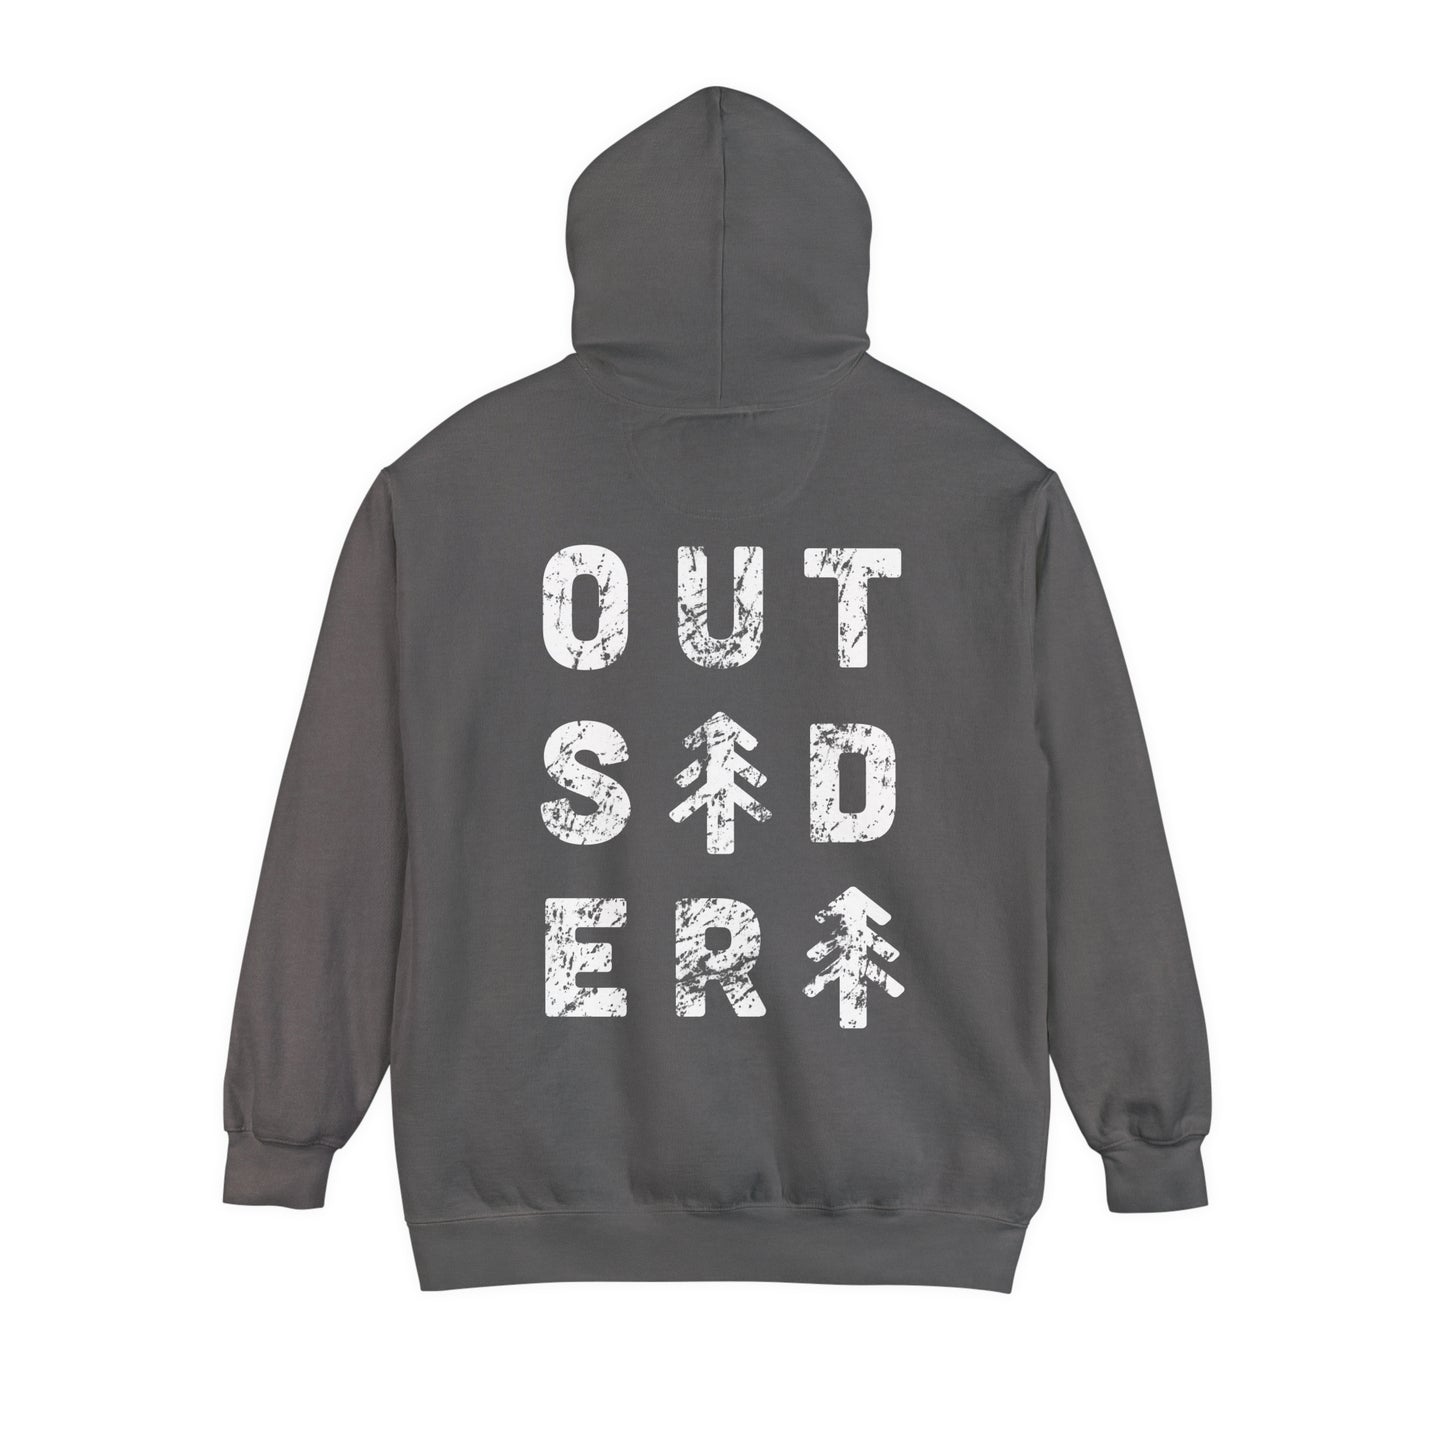 Outsider front & back Unisex Garment-Dyed Hoodie